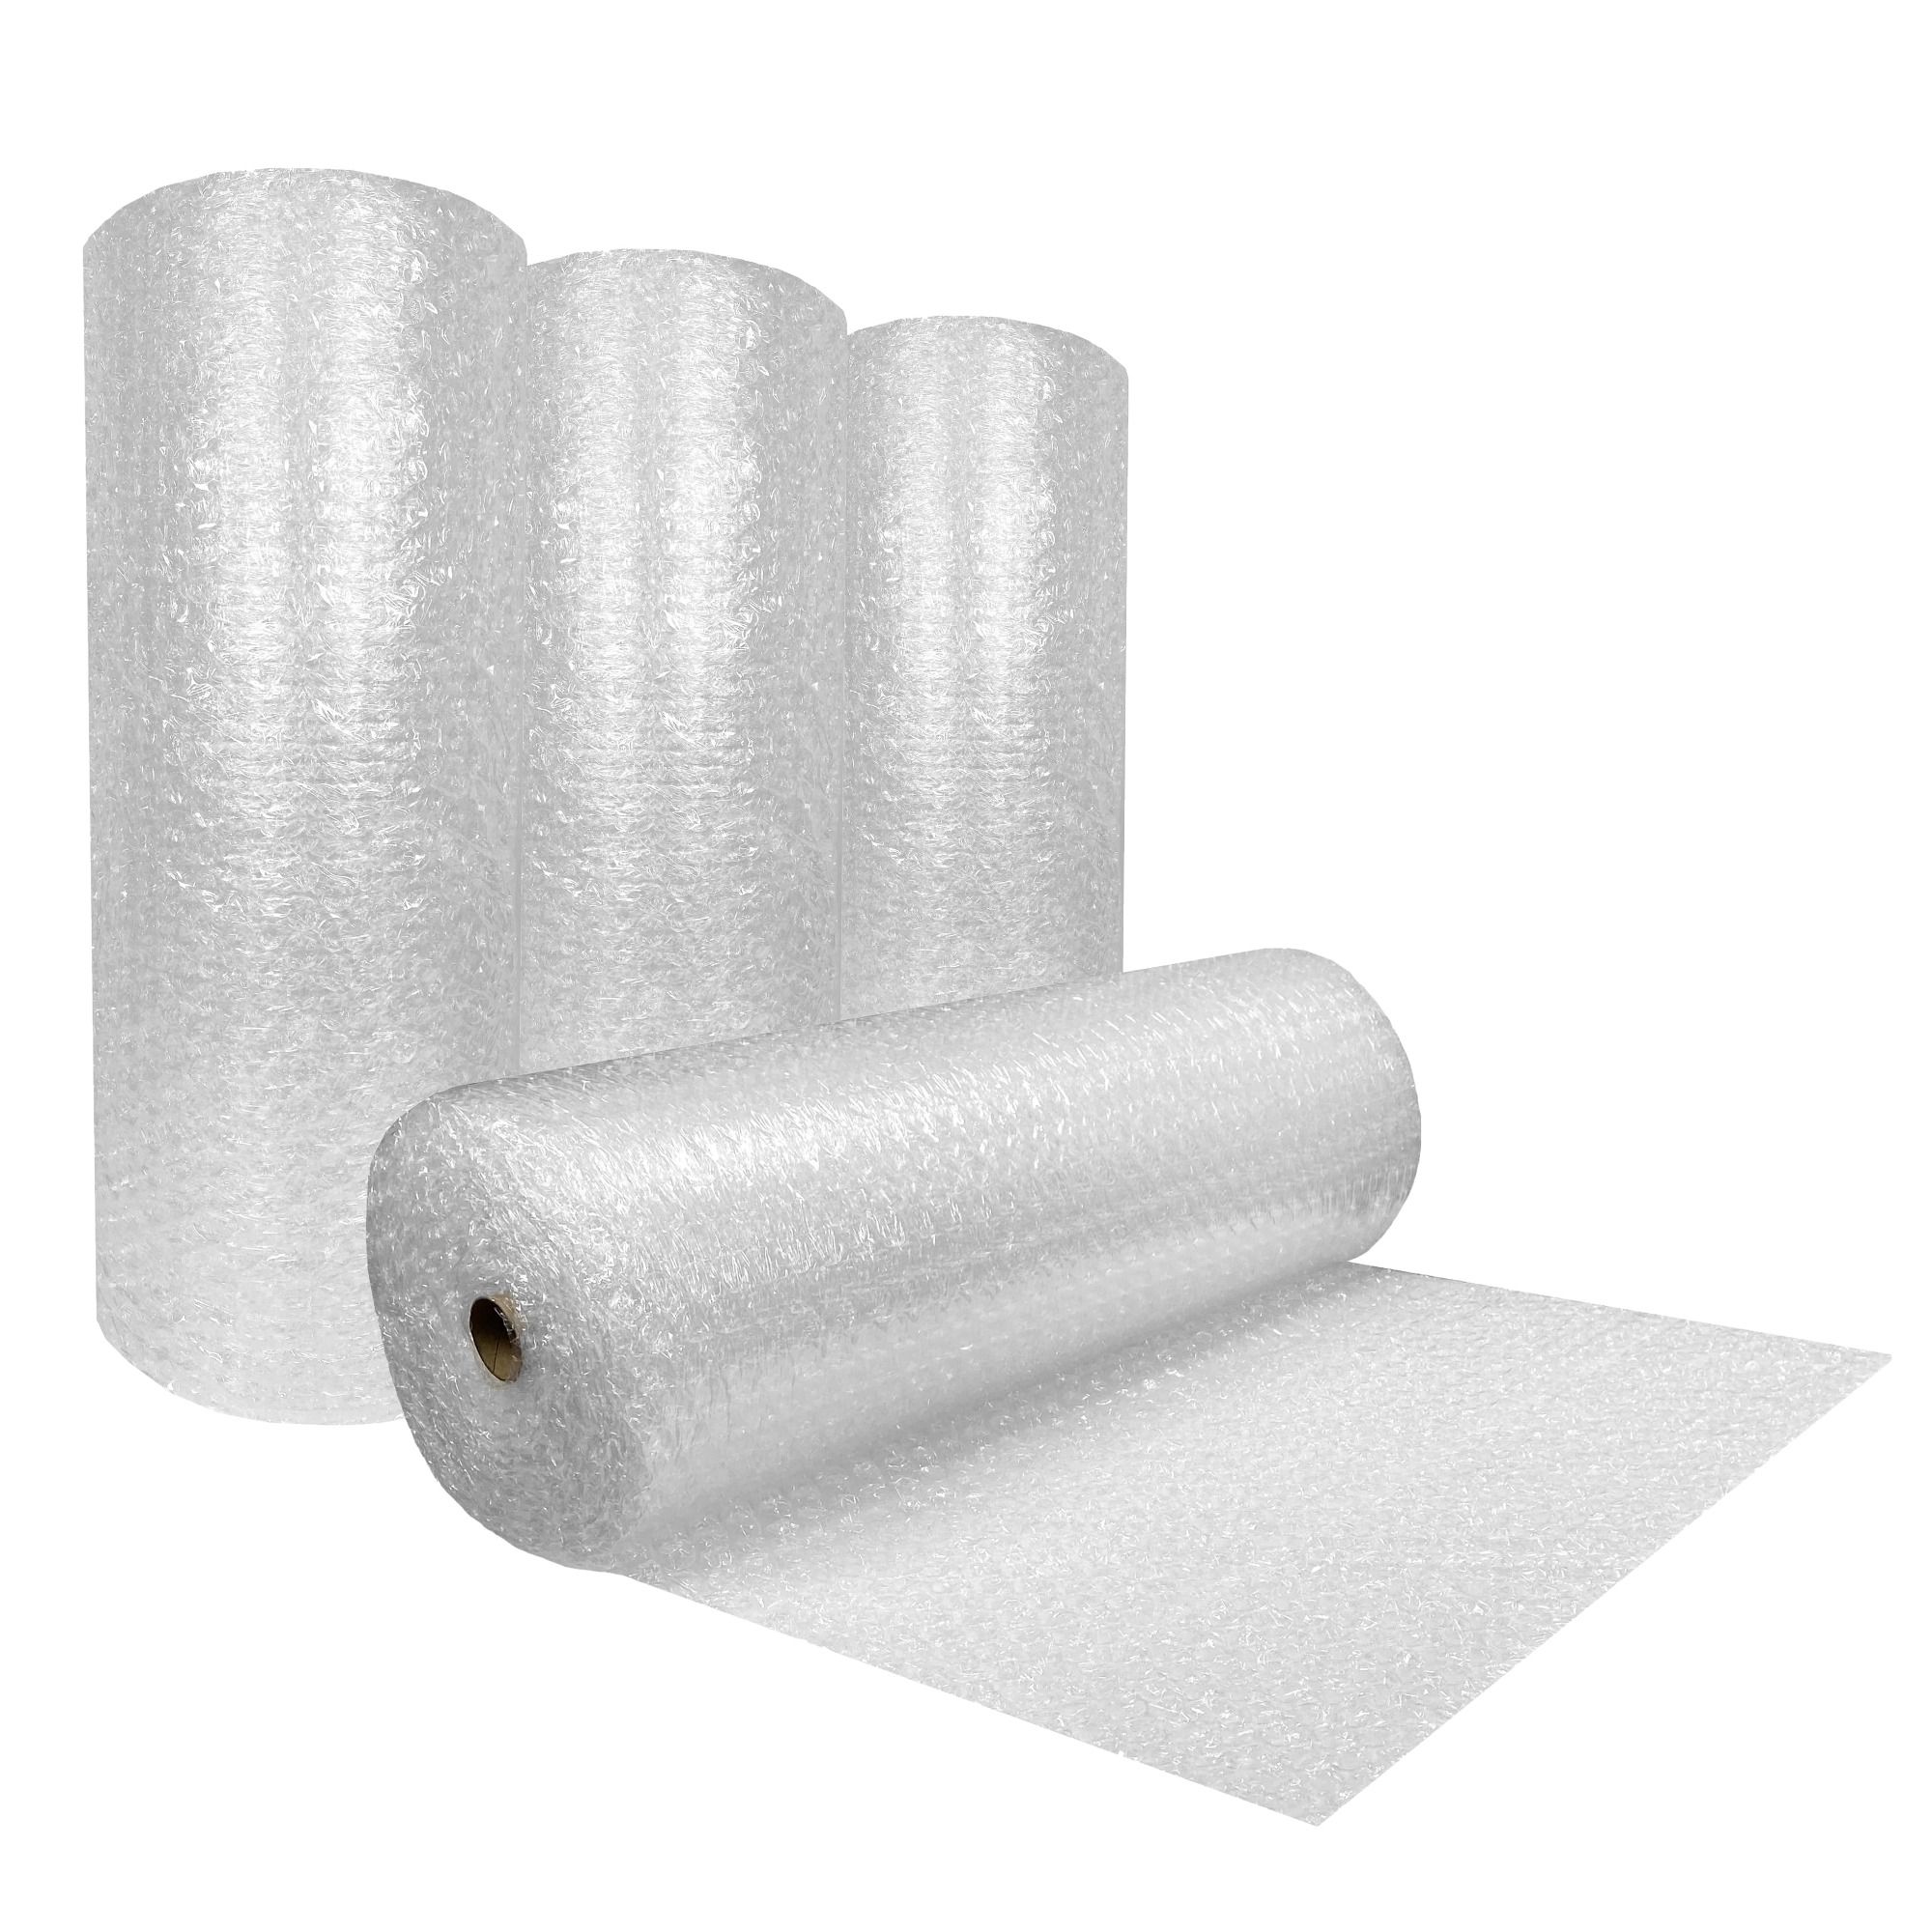  Bubble Roll Wrap 48 Wide x 65' Large Bubbles 1/2 Perforated  12 : Office Products